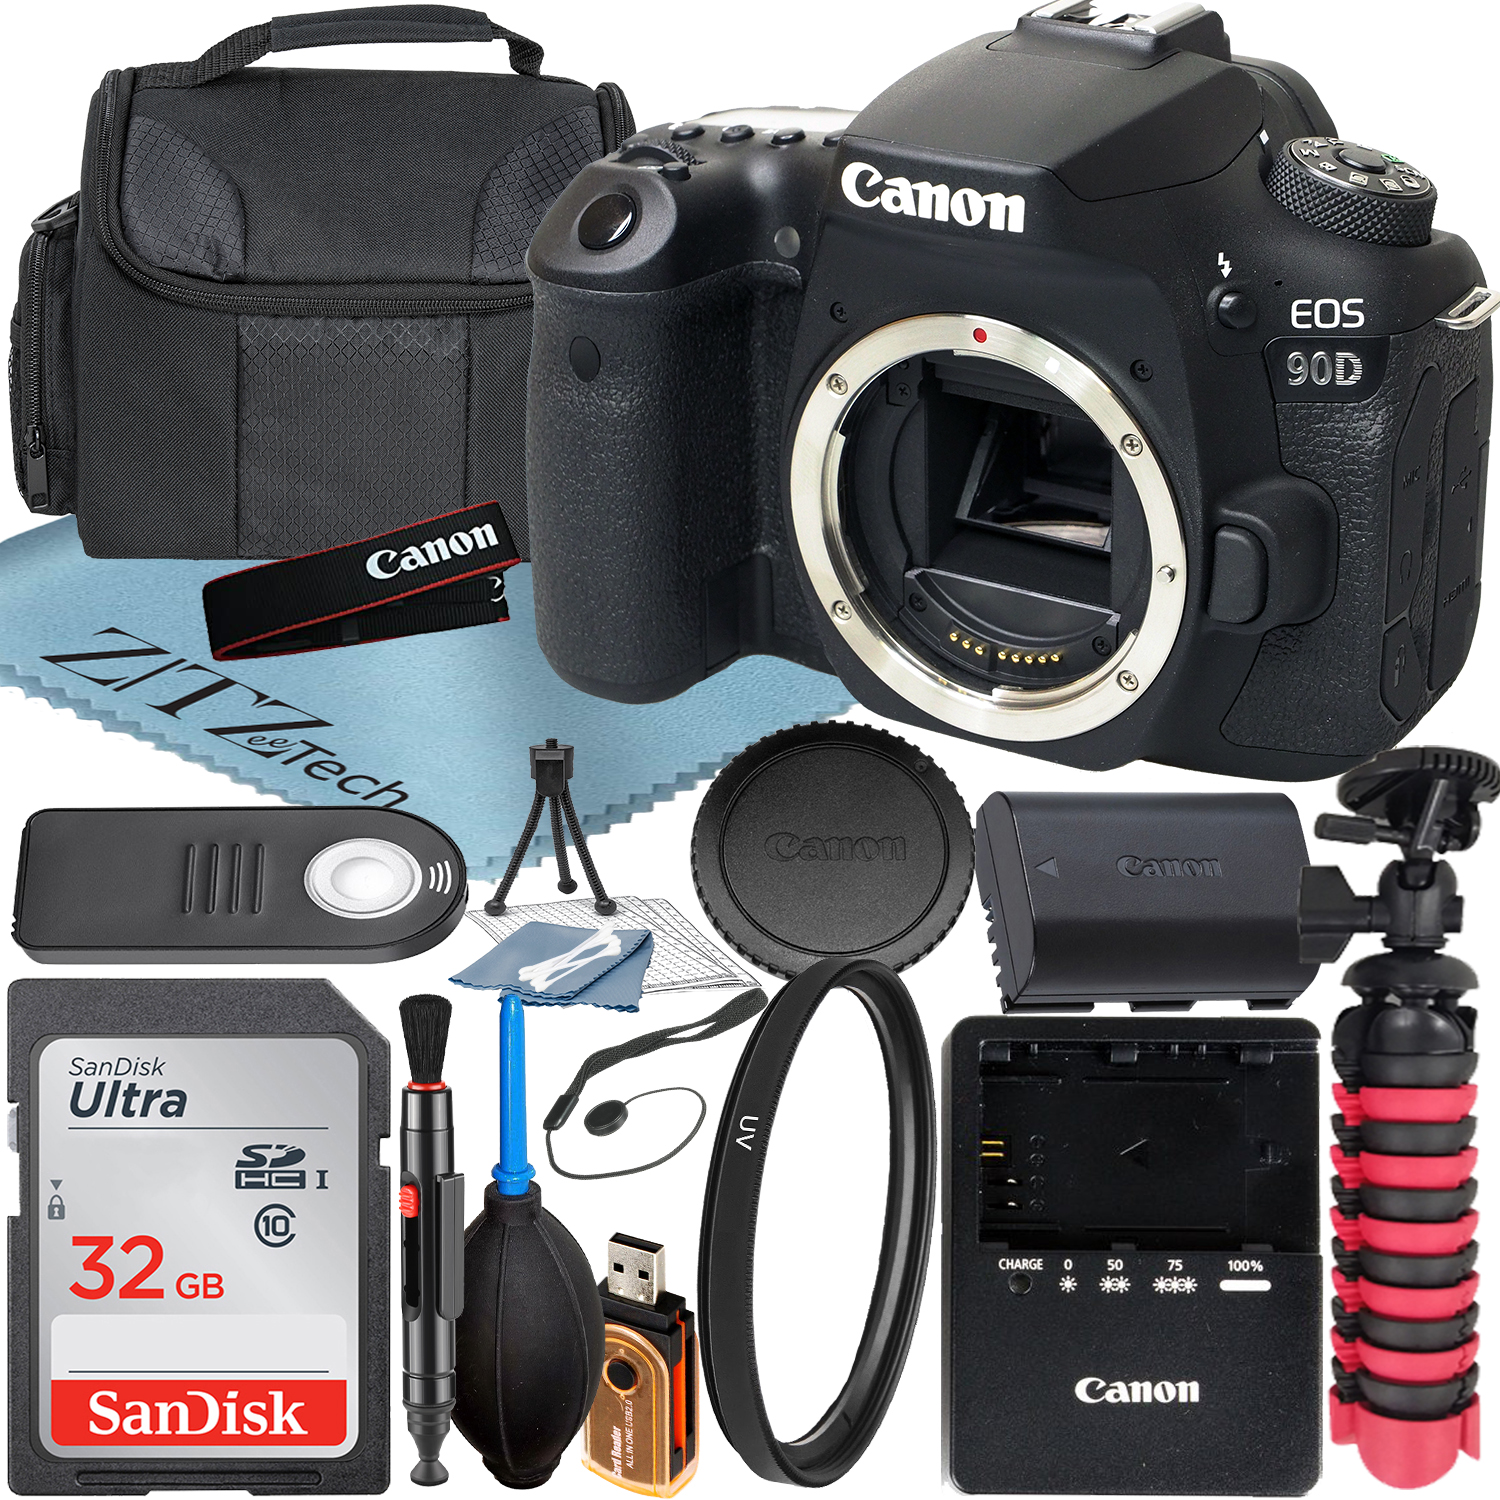 Canon EOS 90D DSLR Camera (Body Only) with 32.5MP CMOS Sensor + SanDisk 32GB Memory Card + Case + UV Filter + ZeeTech Accessory Bundle